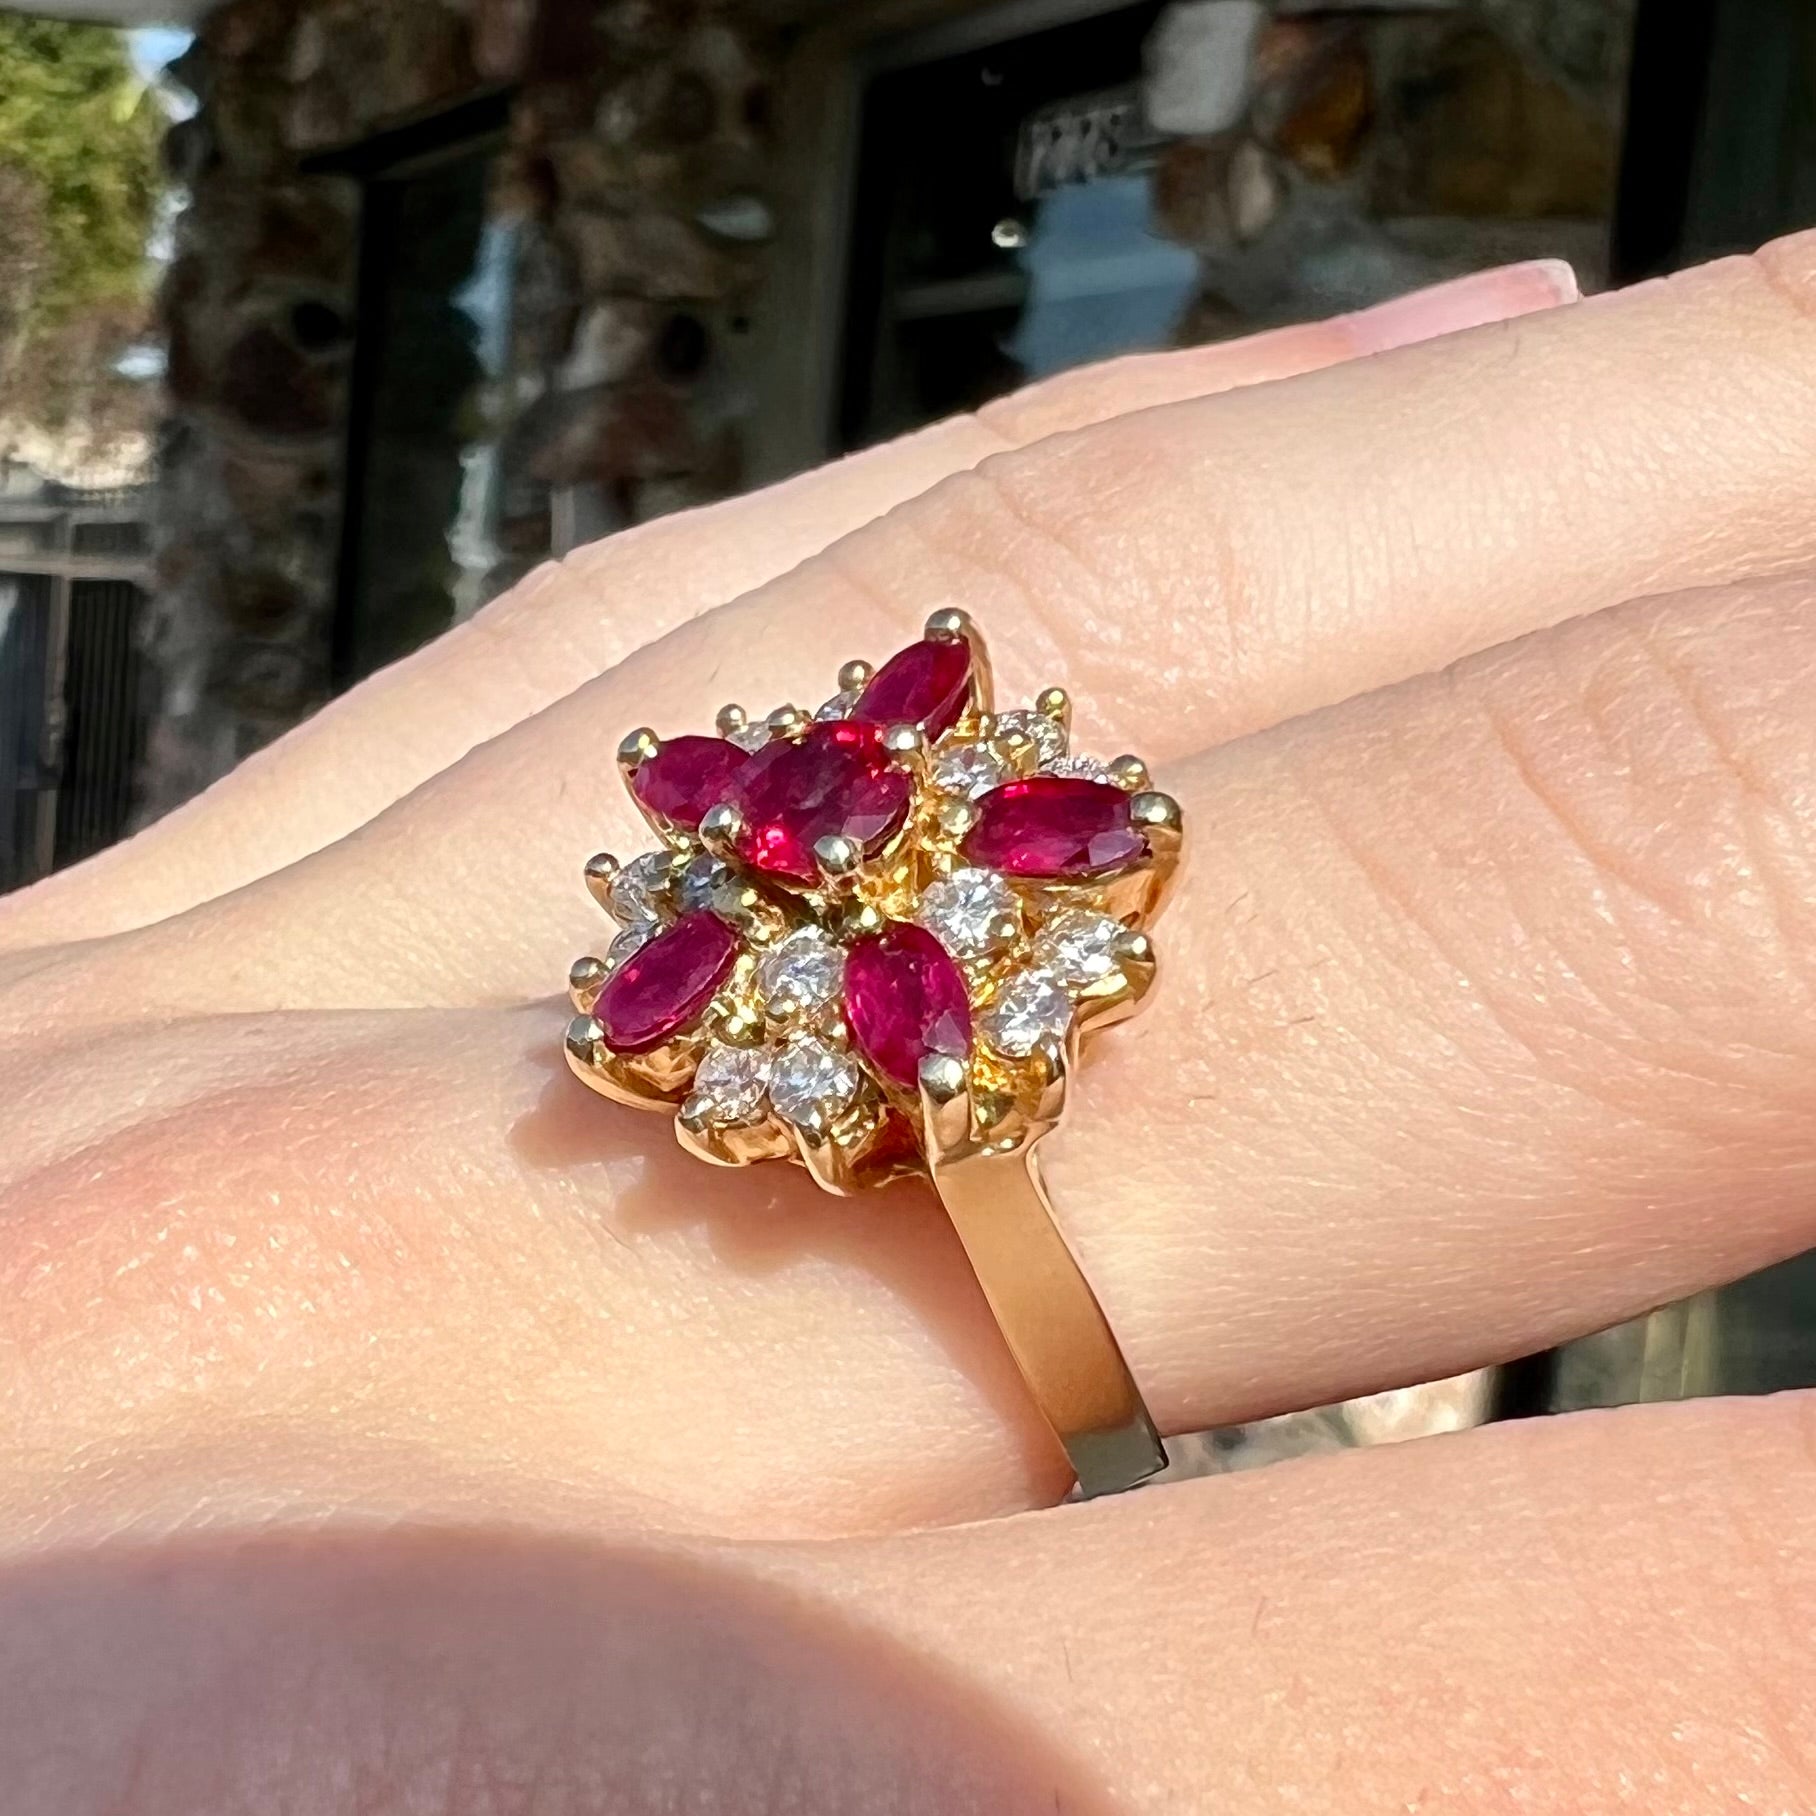 A yellow gold cluster ring set with pigeon blood red Burma rubies and diamonds.